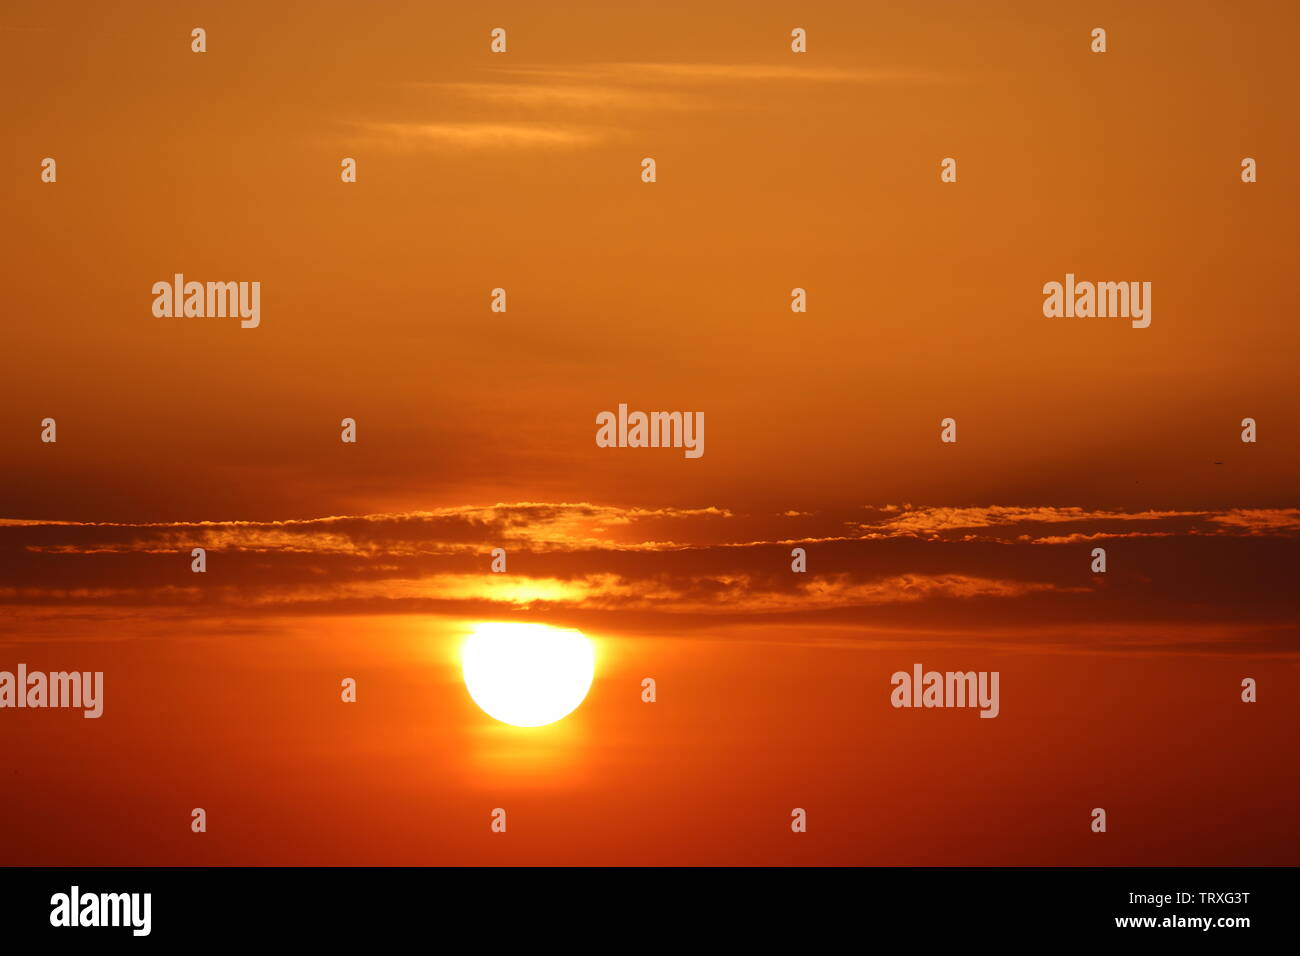 Sunset with clouds, setting shining sun and orange evening sky. Beautiful skyline for background Stock Photo